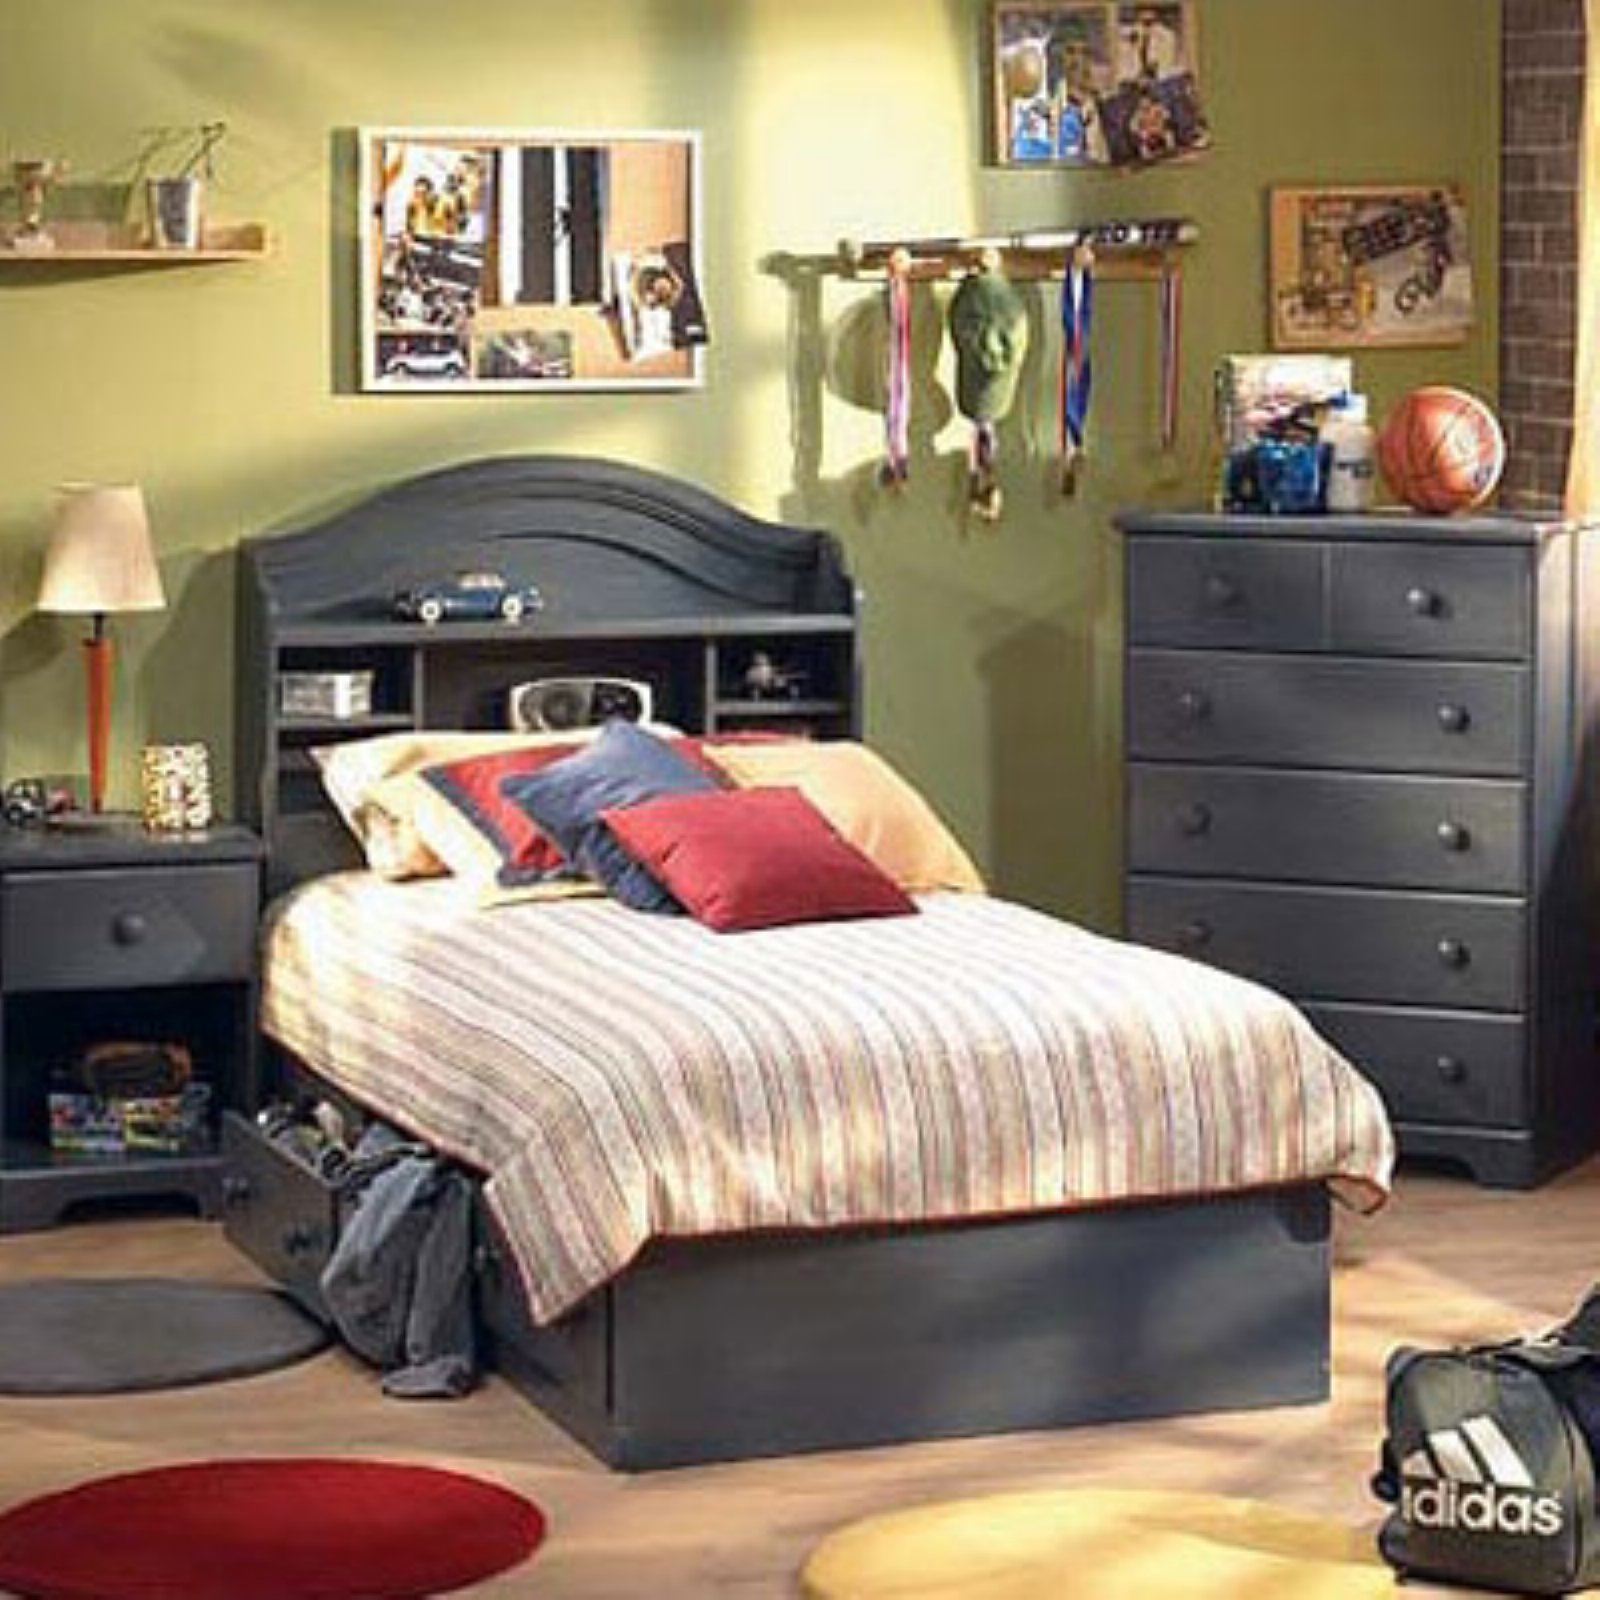 South Shore Summer Breeze Mates Twin Blueberry Bookcase Bed Collection - image 1 of 4